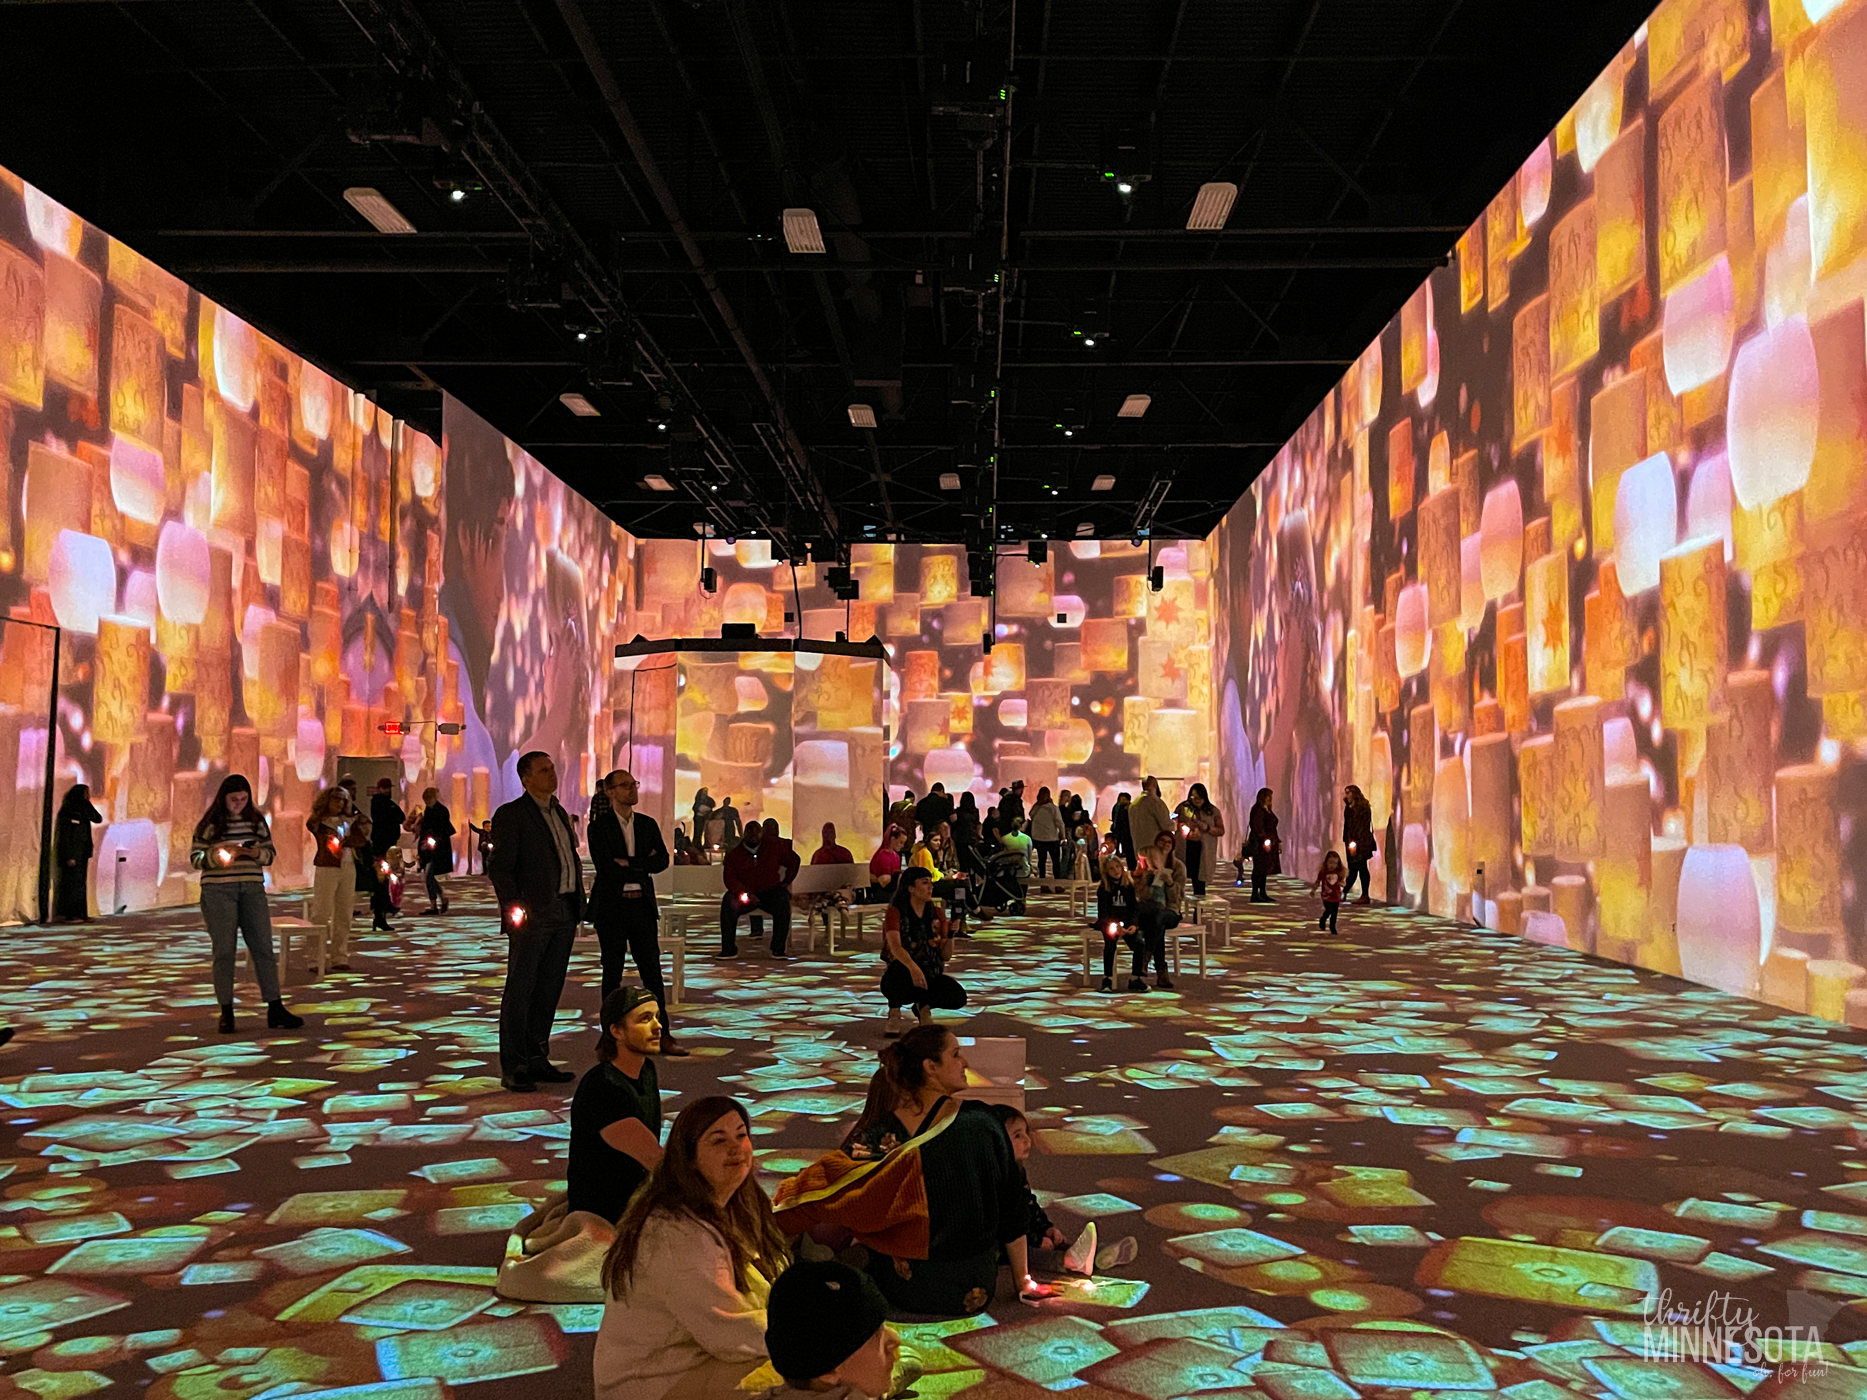 Immersive Disney Animation Wall Effects